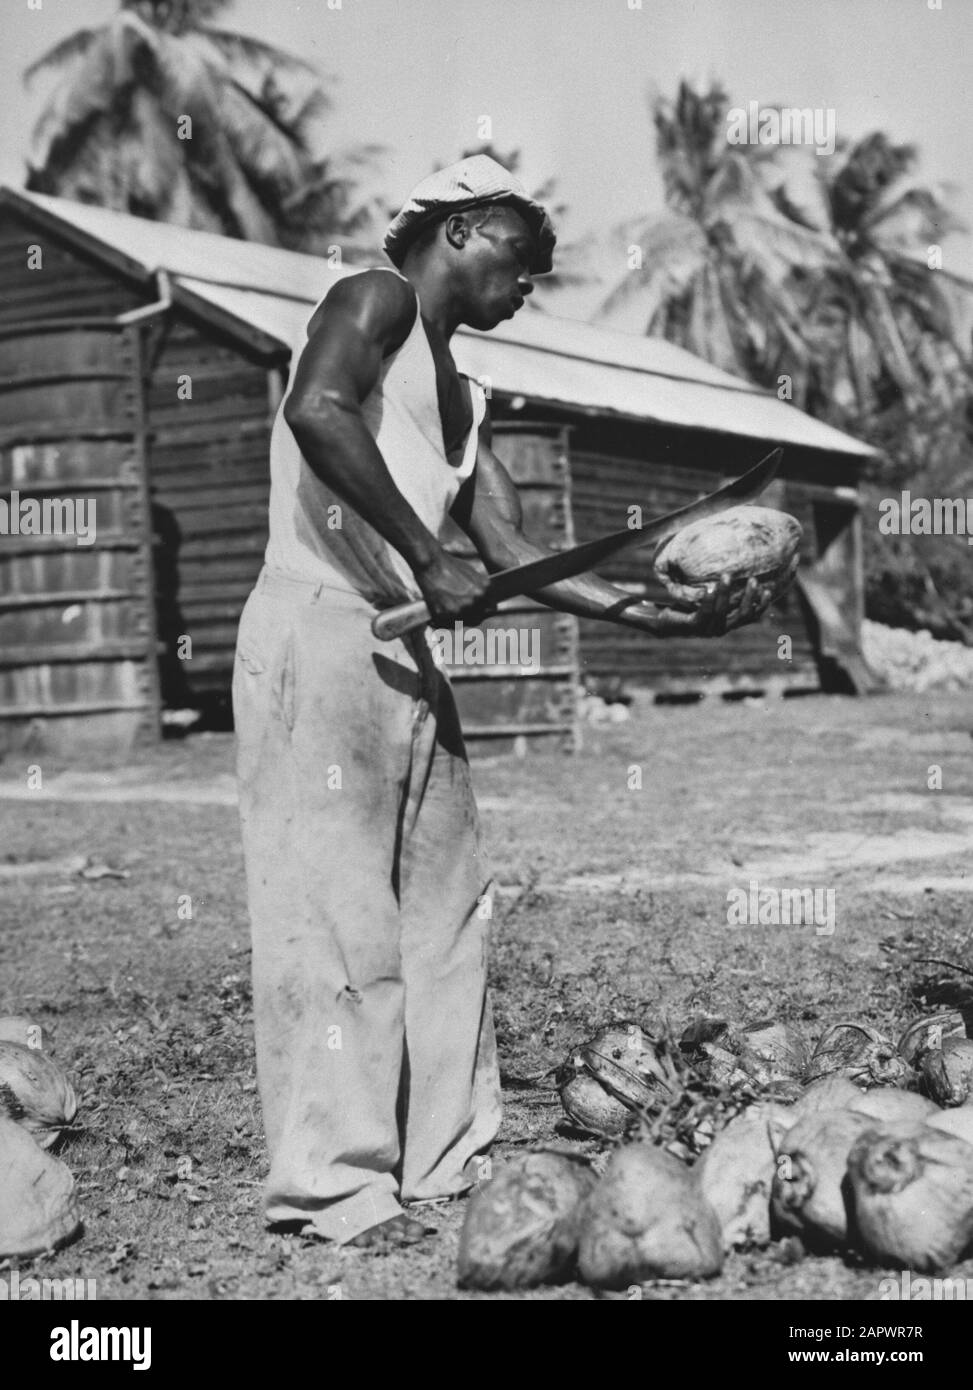 Wi [West Indies]/Anefo London series  Native opening a coconut. Surinam, Dutch West Indies [Surinamer opens a coconut] Date: {1940-1945} Location: Coronie, Suriname Keywords: natives, coconuts, Second World War Stock Photo